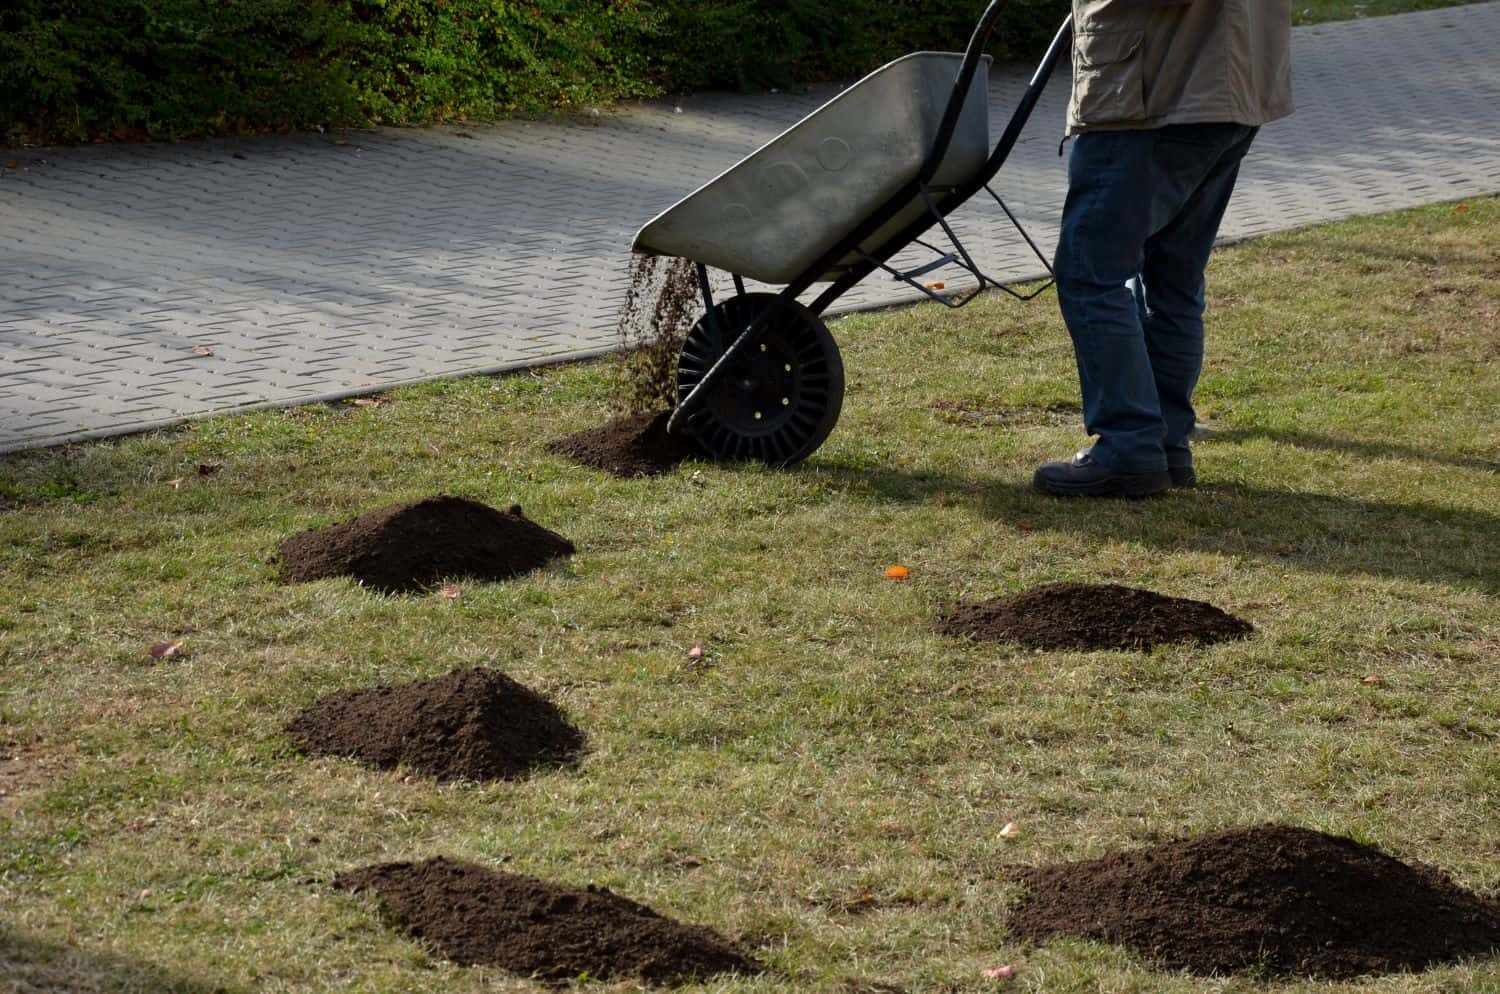 Top Dressing Your Lawn with Compost